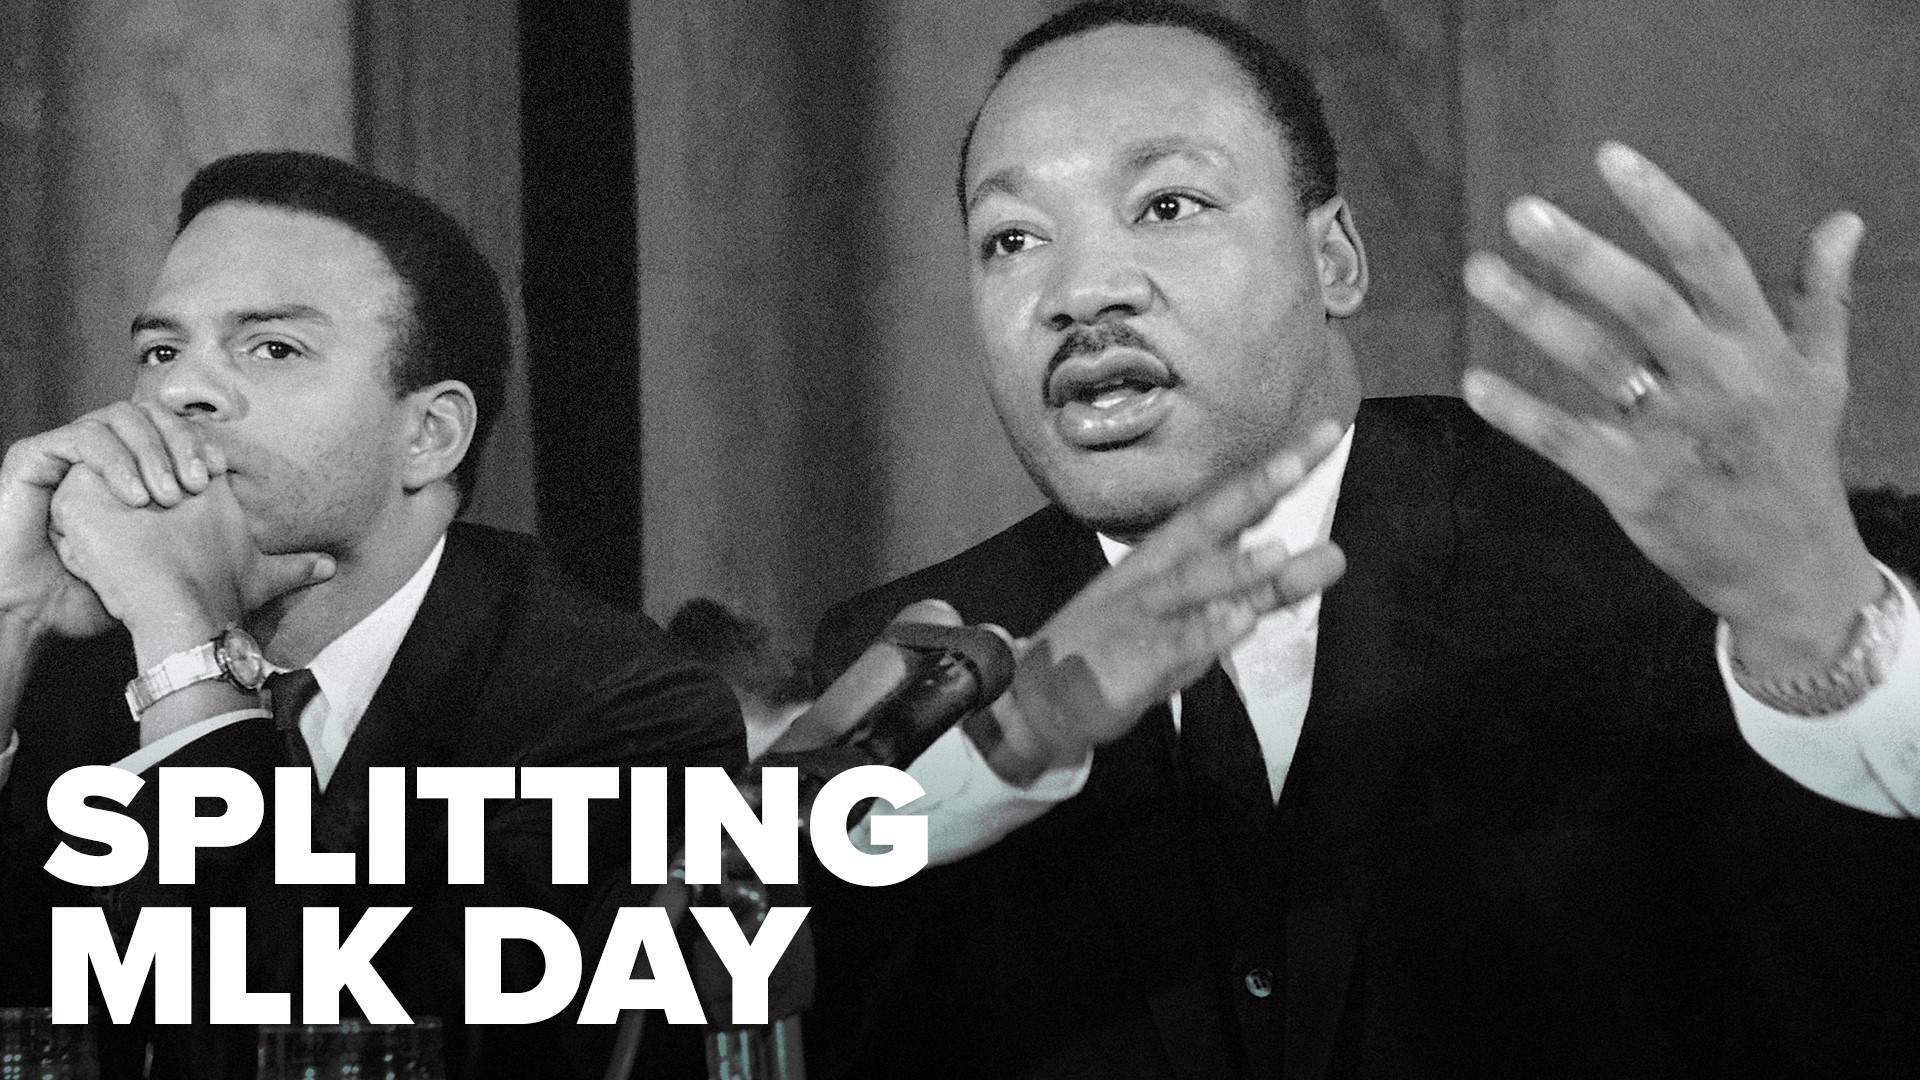 In 2017, Gov. Asa Hutchinson signed legislation that required MLK Day and Robert E. Lee Day to be celebrated on different days in Arkansas.